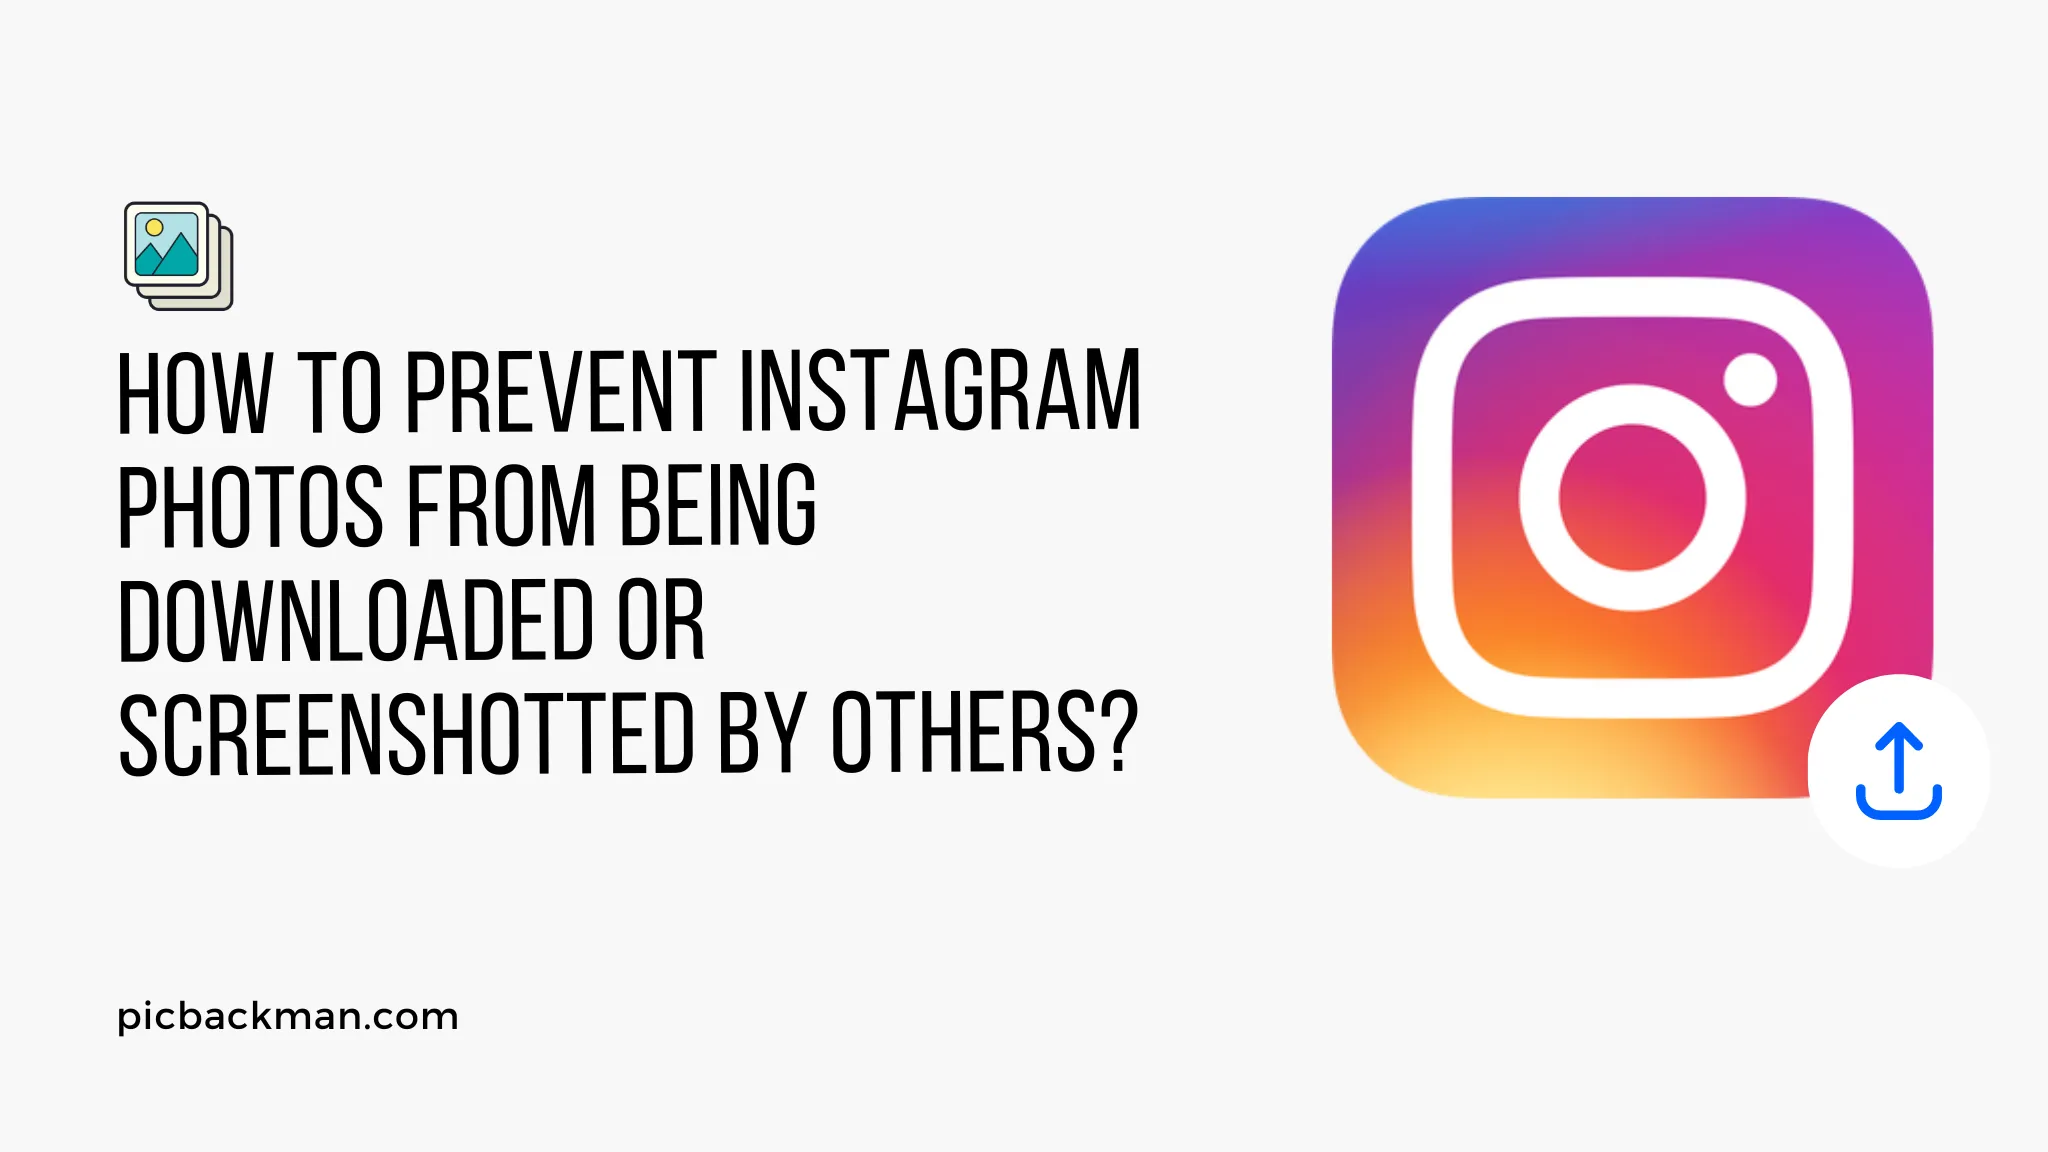 How to prevent Instagram photos from being downloaded or screenshotted by others